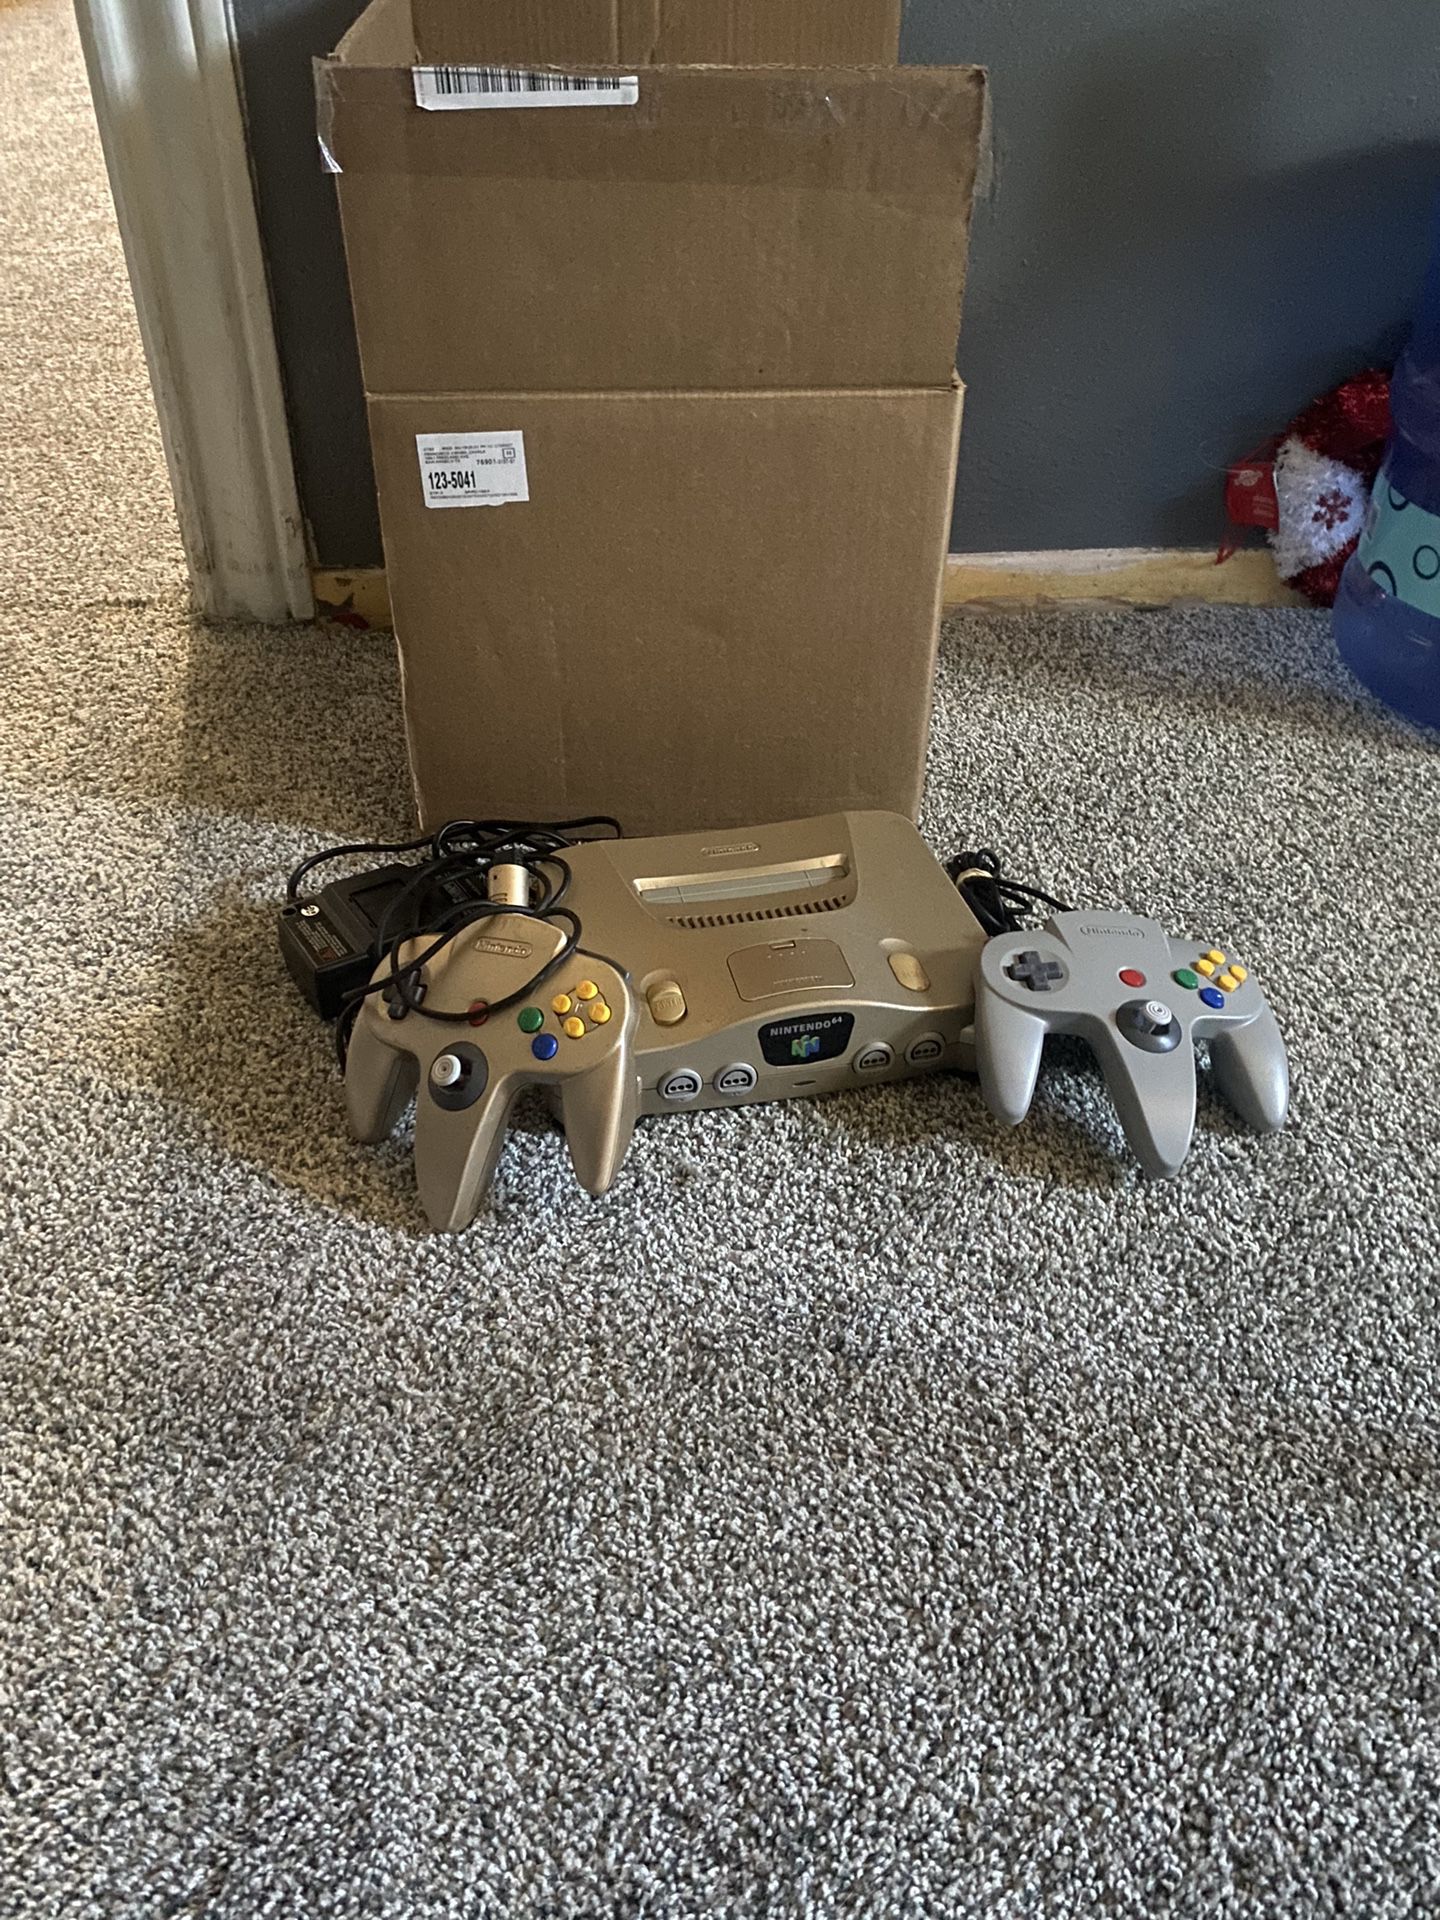 Gold Nintendo 64 (2 Controllers )